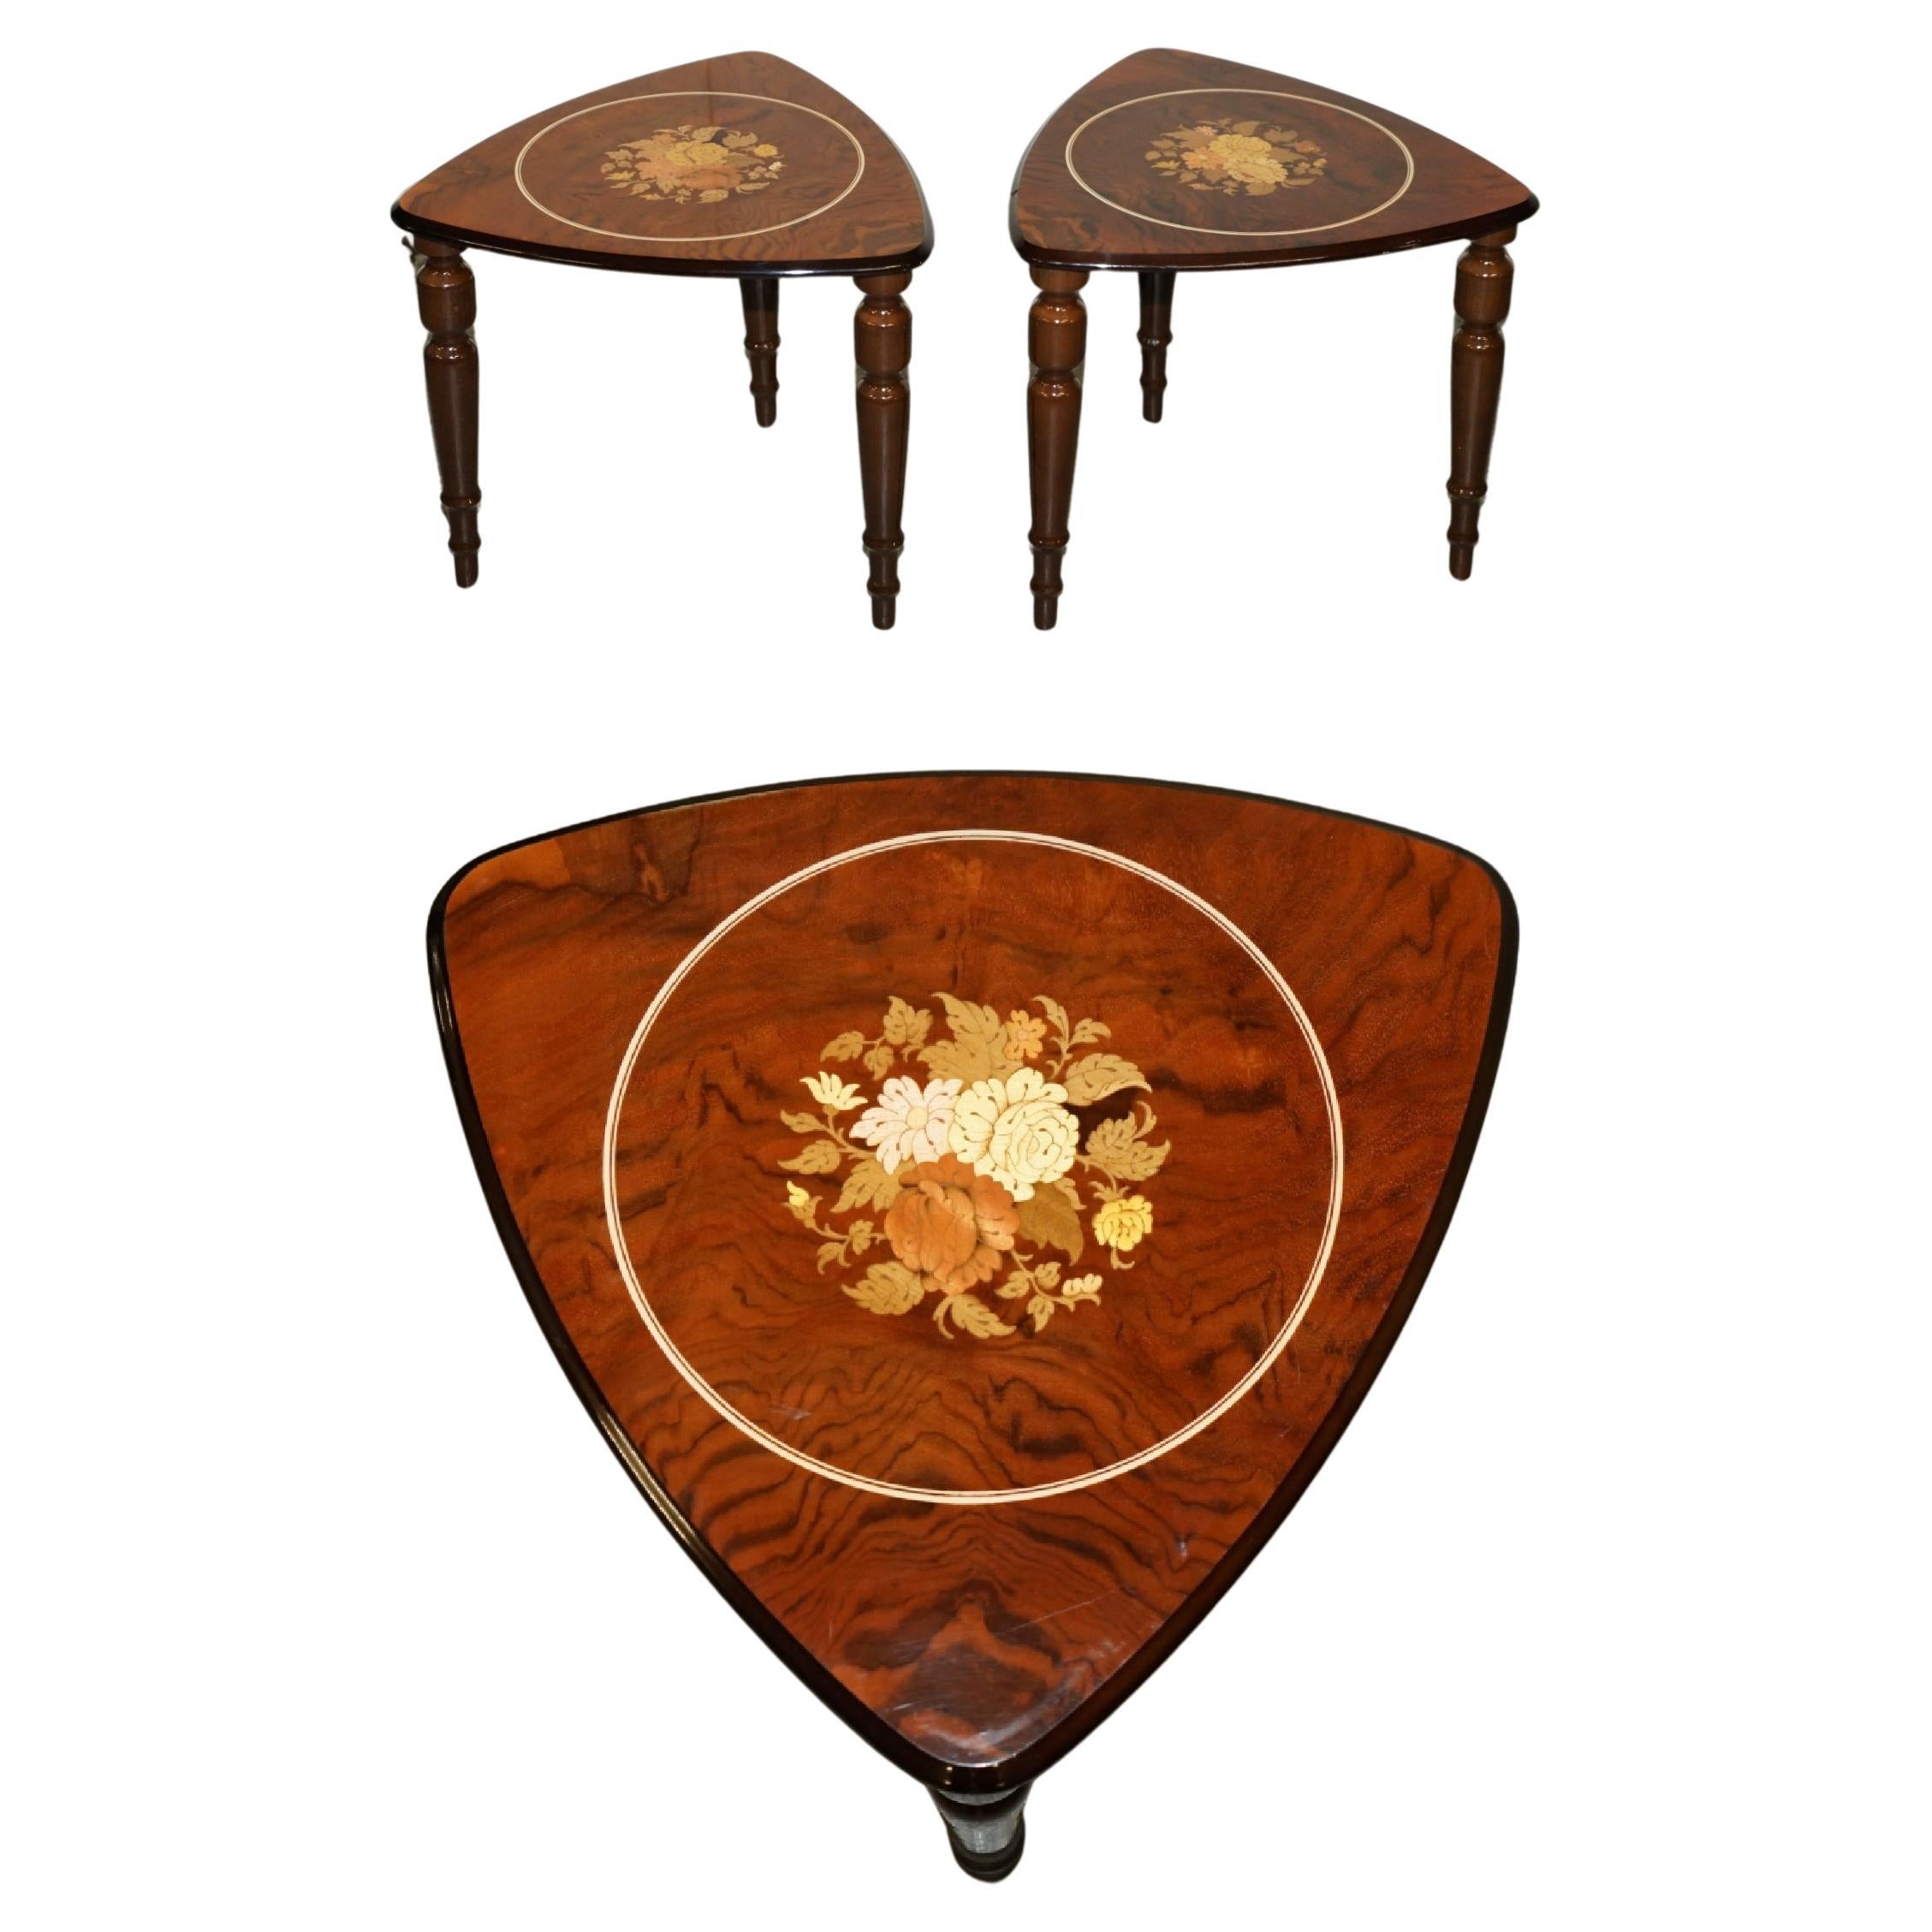 FINE PAIR OF ITALIAN BURR WALNUT MARQUETRY INLAID SiDE END LAMP WINE TABLES